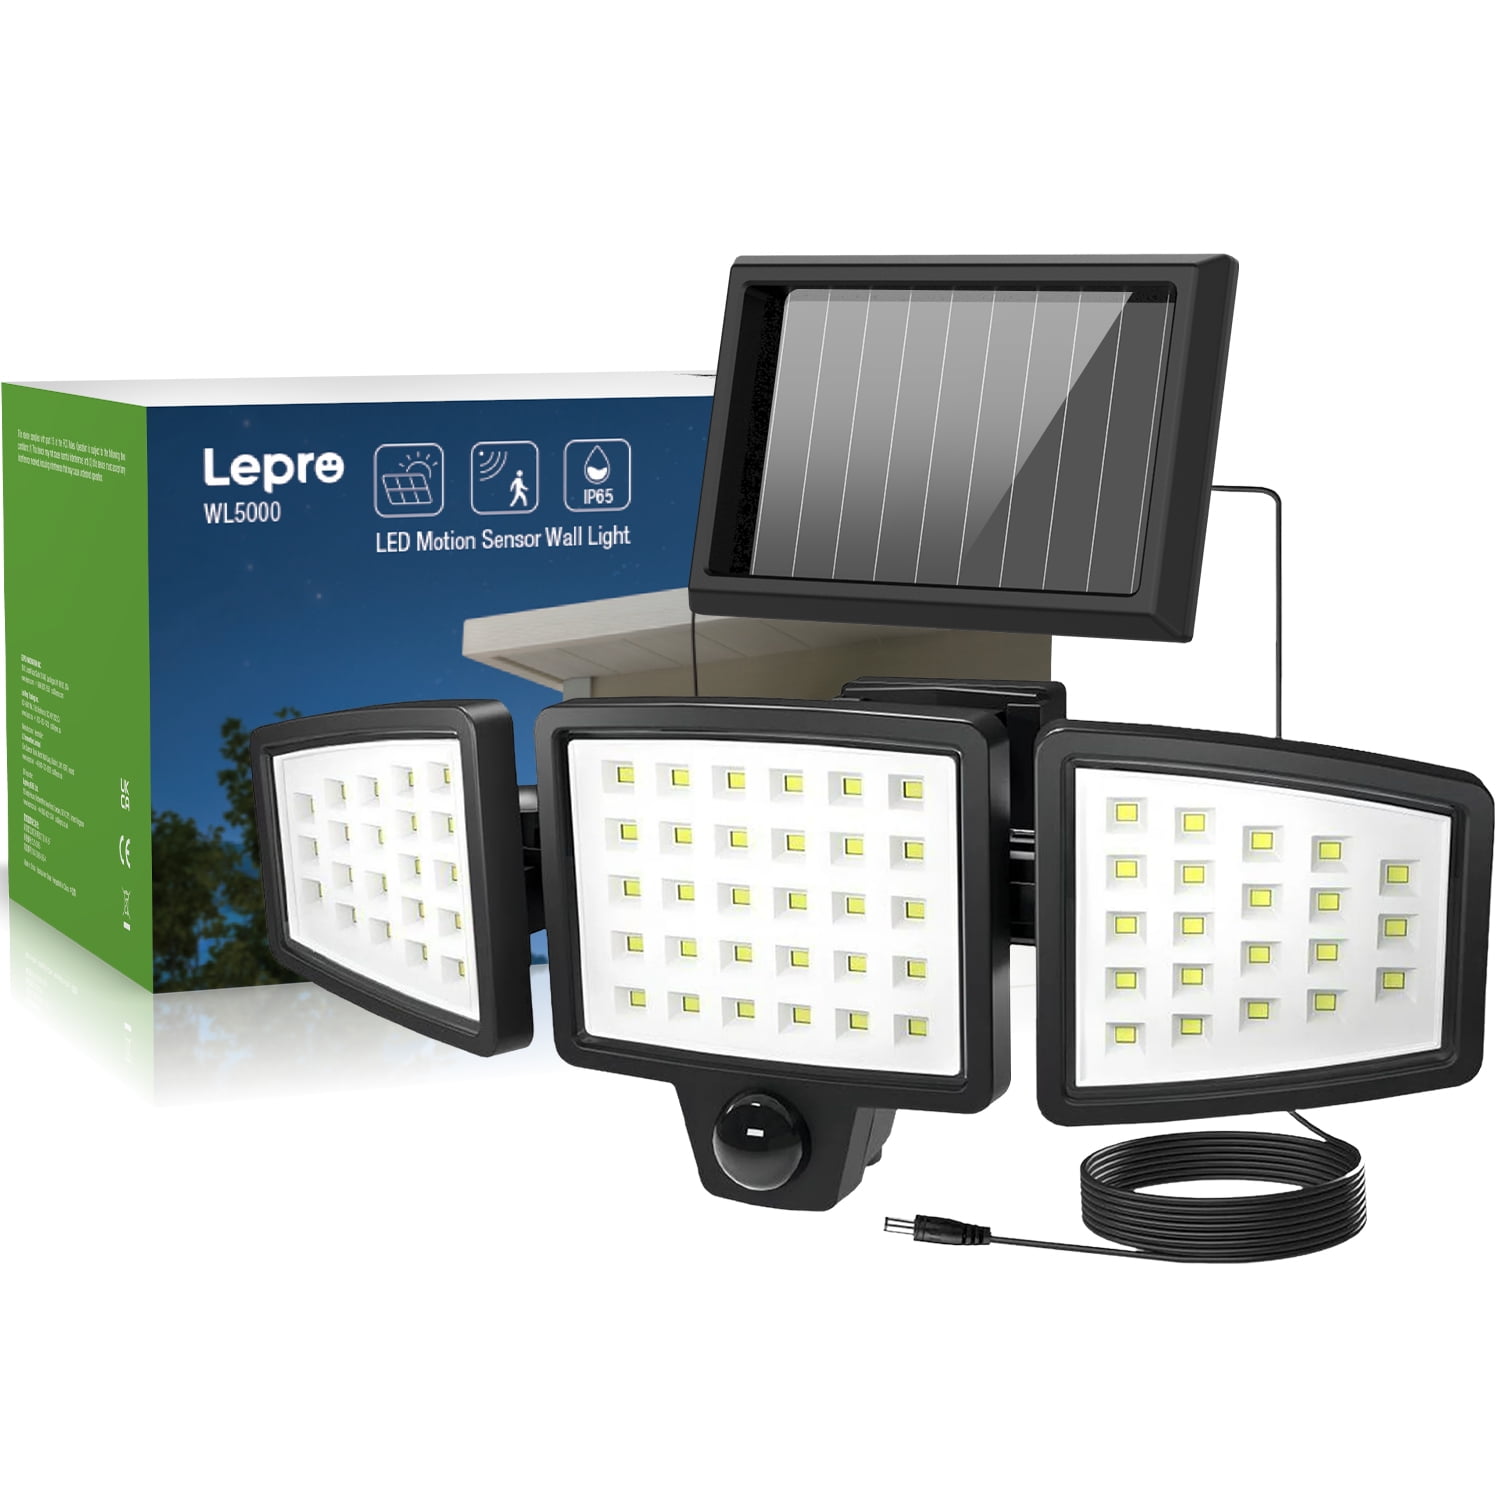 Lepro Outdoor Solar Flood Lights WL5000 Motion Activated - Separate Solar Panel - 3 Adjustable Heads - IP65 Waterproof